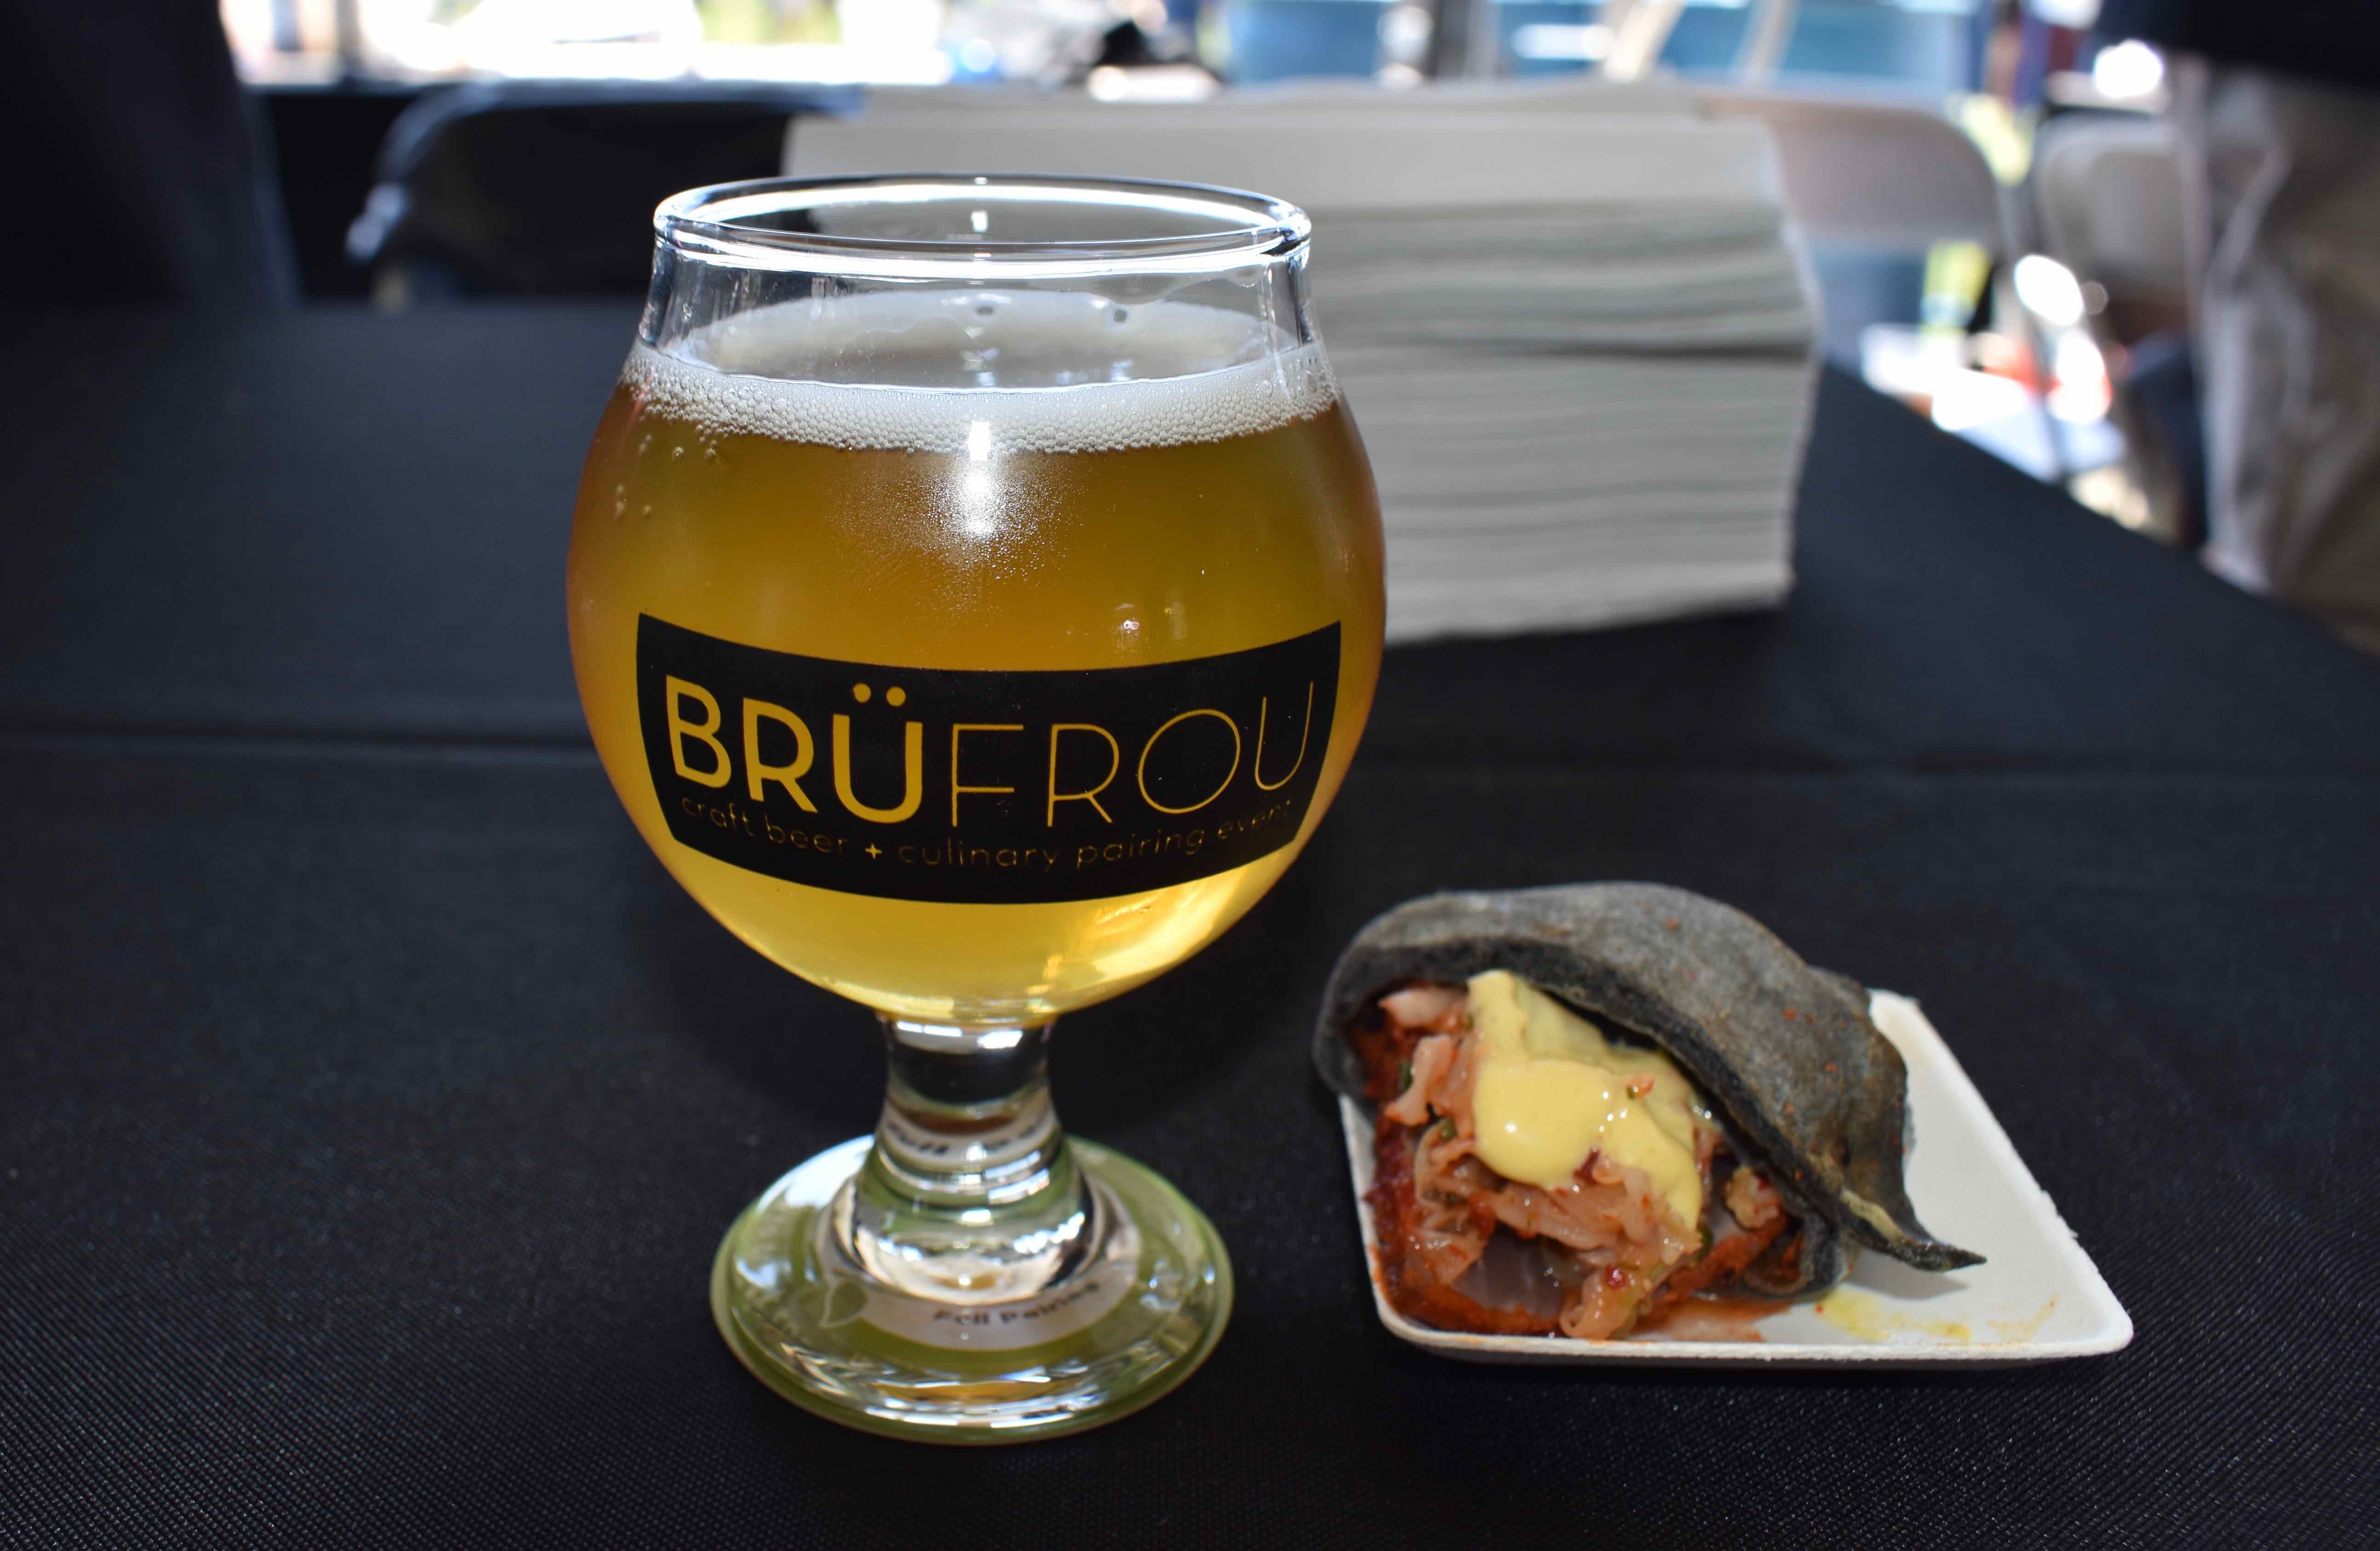 BrüFrouFest 2017, BrüFrou, Alysia Shoemaker, 303 Magazine, Craft Beer, Craft Beer and food, Craft Beer and Culinary pairings, Tivoli Quad, Photography by Alysia Shoemaker, Verboten Brewing, Blackbelly, Westbound & Down Brewing, The Buffalo, Euclid Hall, Grimm Brothers Brewhouse, Freshcraft, Horse & Dragon Brewing, Maria Empanada, Asher Brewing, Rebel, Mockery Brewing, Williams & Graham, Black Project Spontaneous & Wild Ales, Campus Lounge, Tivoli Brewing, 4 Noses Brewing, Fish N Beer, Holidaily Brewing, Fresh Thymes Eatery, Glazed & Confused, Fiction Beer Company, Mainline Ale House, High Hops Brewery, Second Home Kitchen + Bar, Banded Oak Brewing, Samples World Bistro, Wibby Brewing